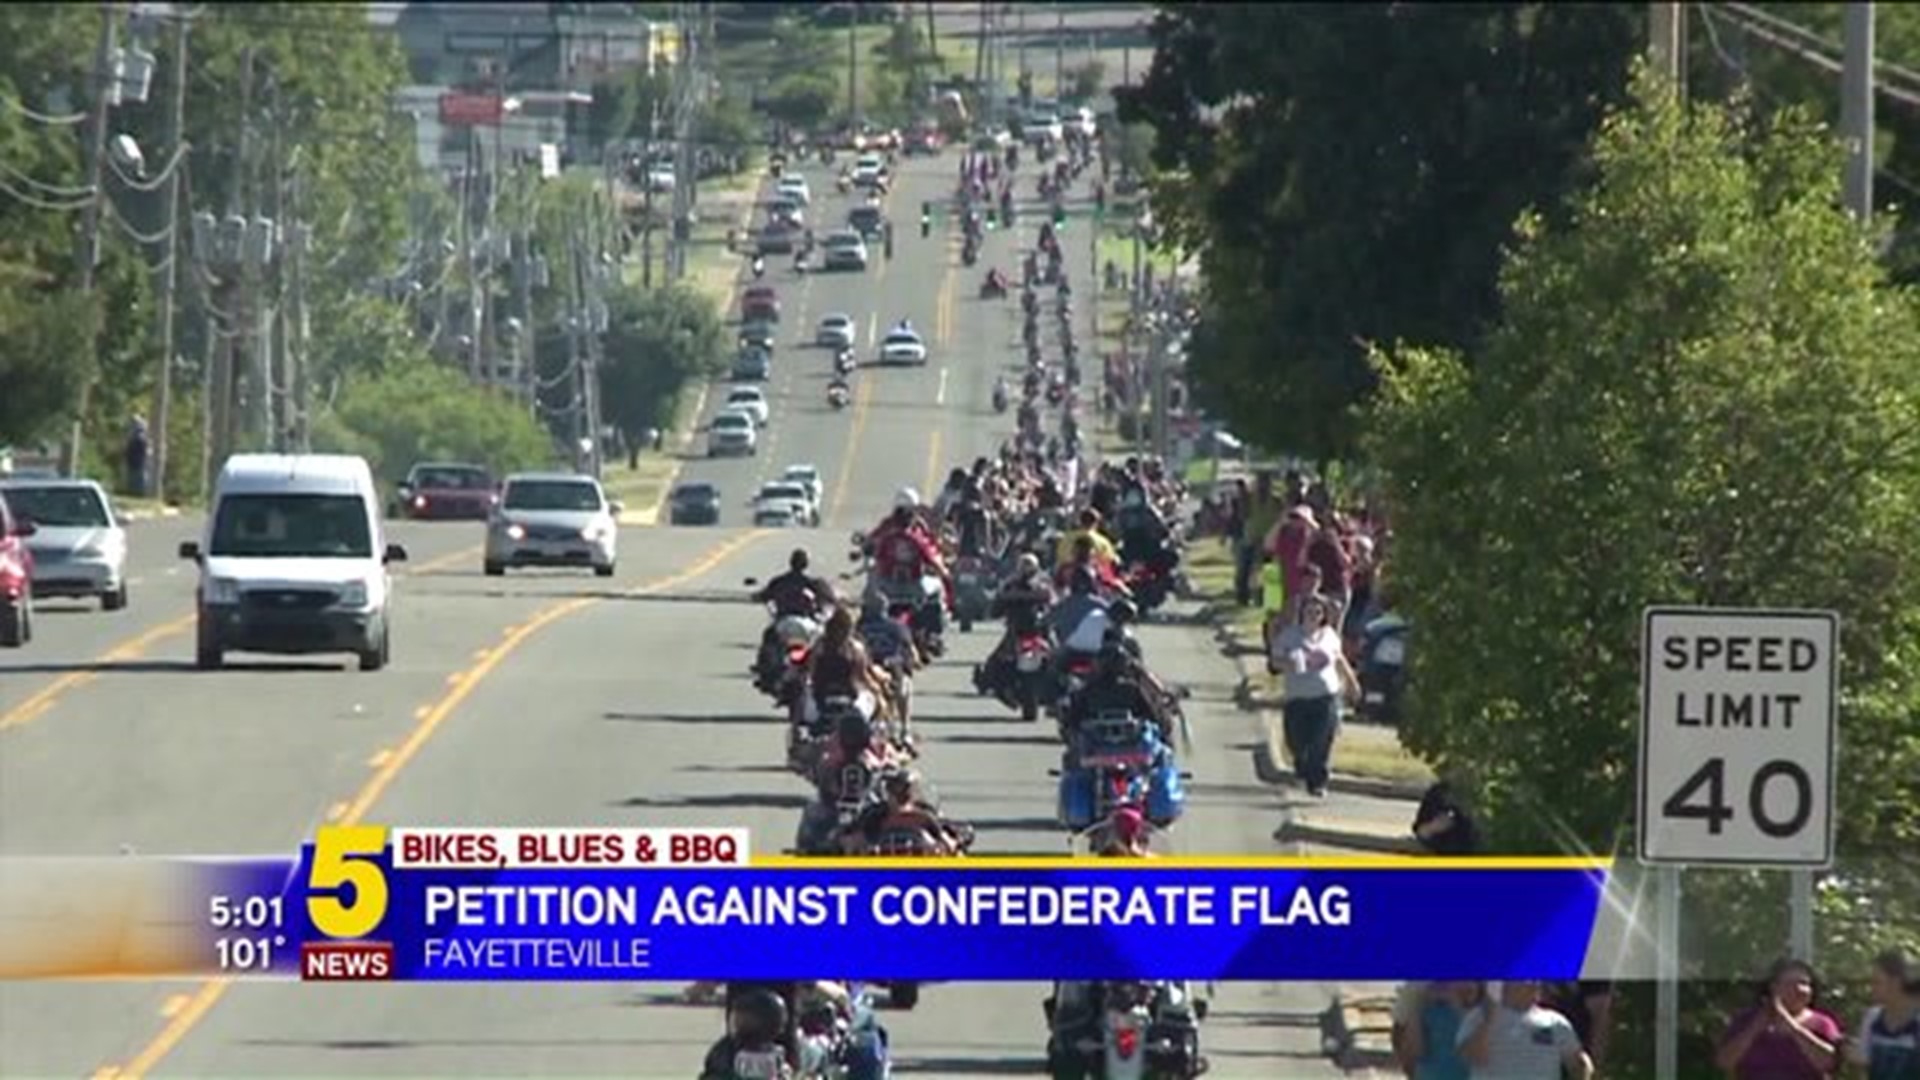 PETITION TO DISCOURAGE CONFEDERATE FLAG AT BIKES, BLUES & BBQ